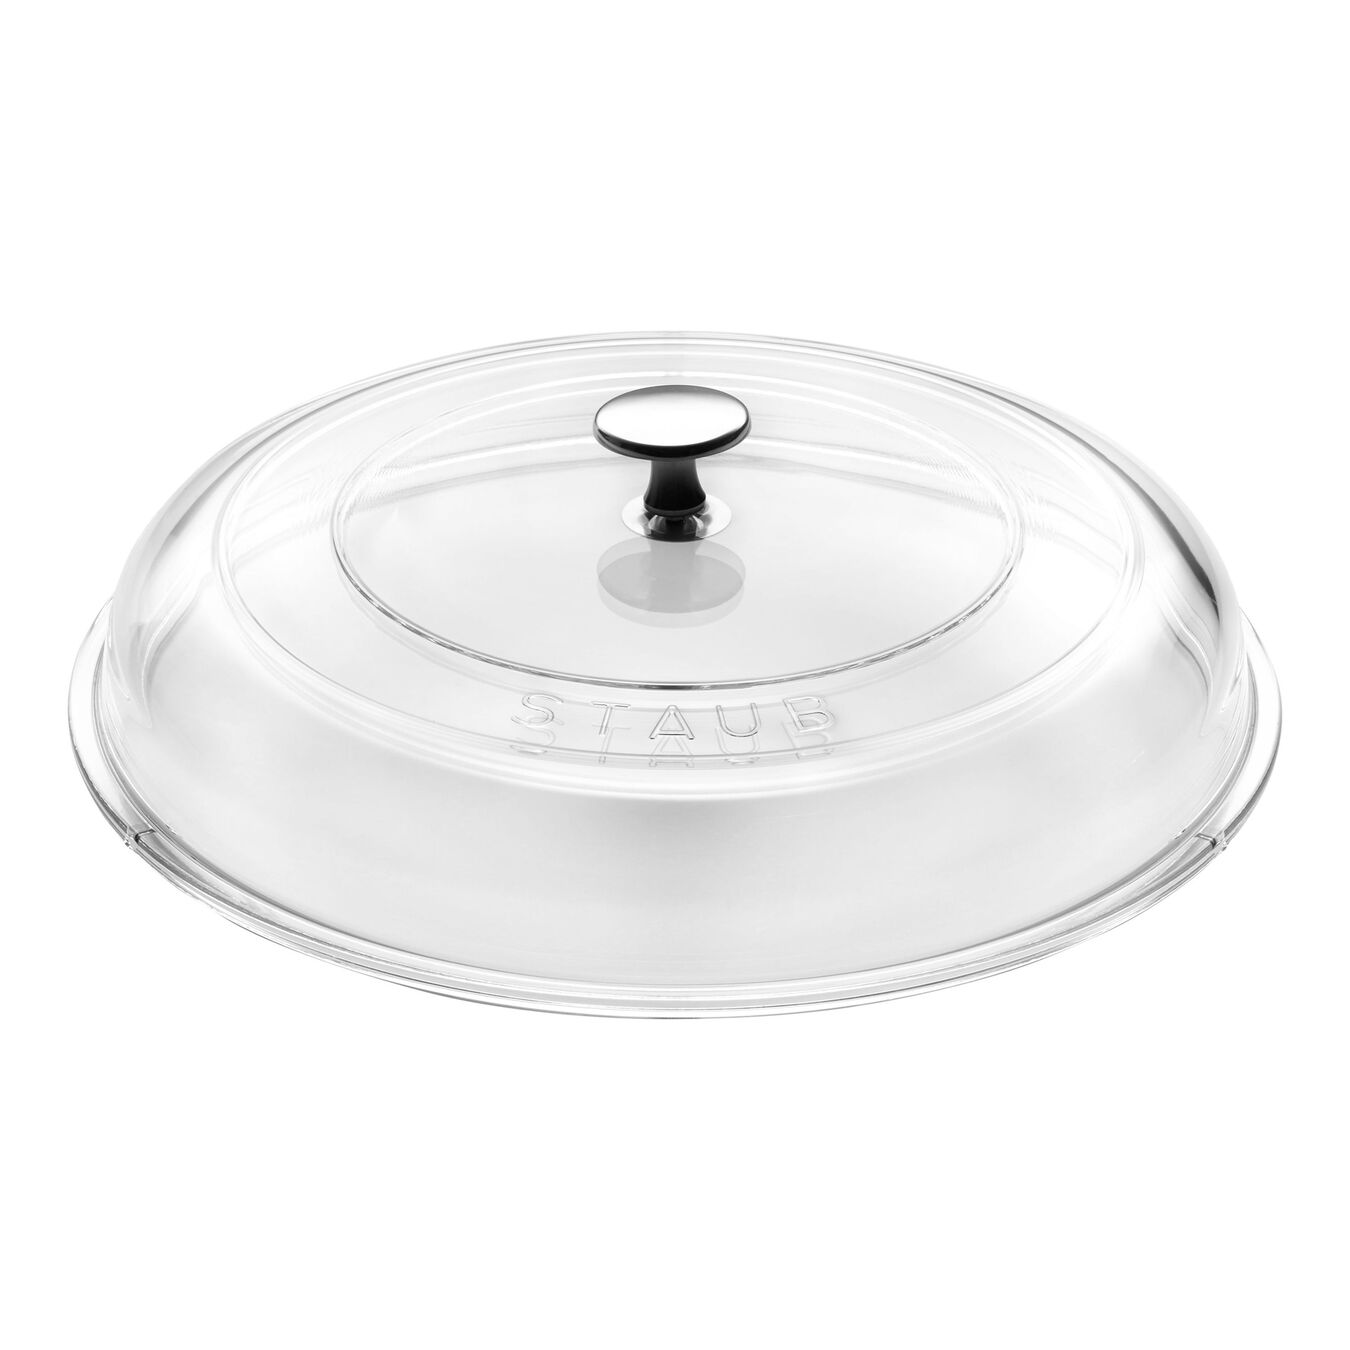 8-inch glass Domed Lid,,large 1